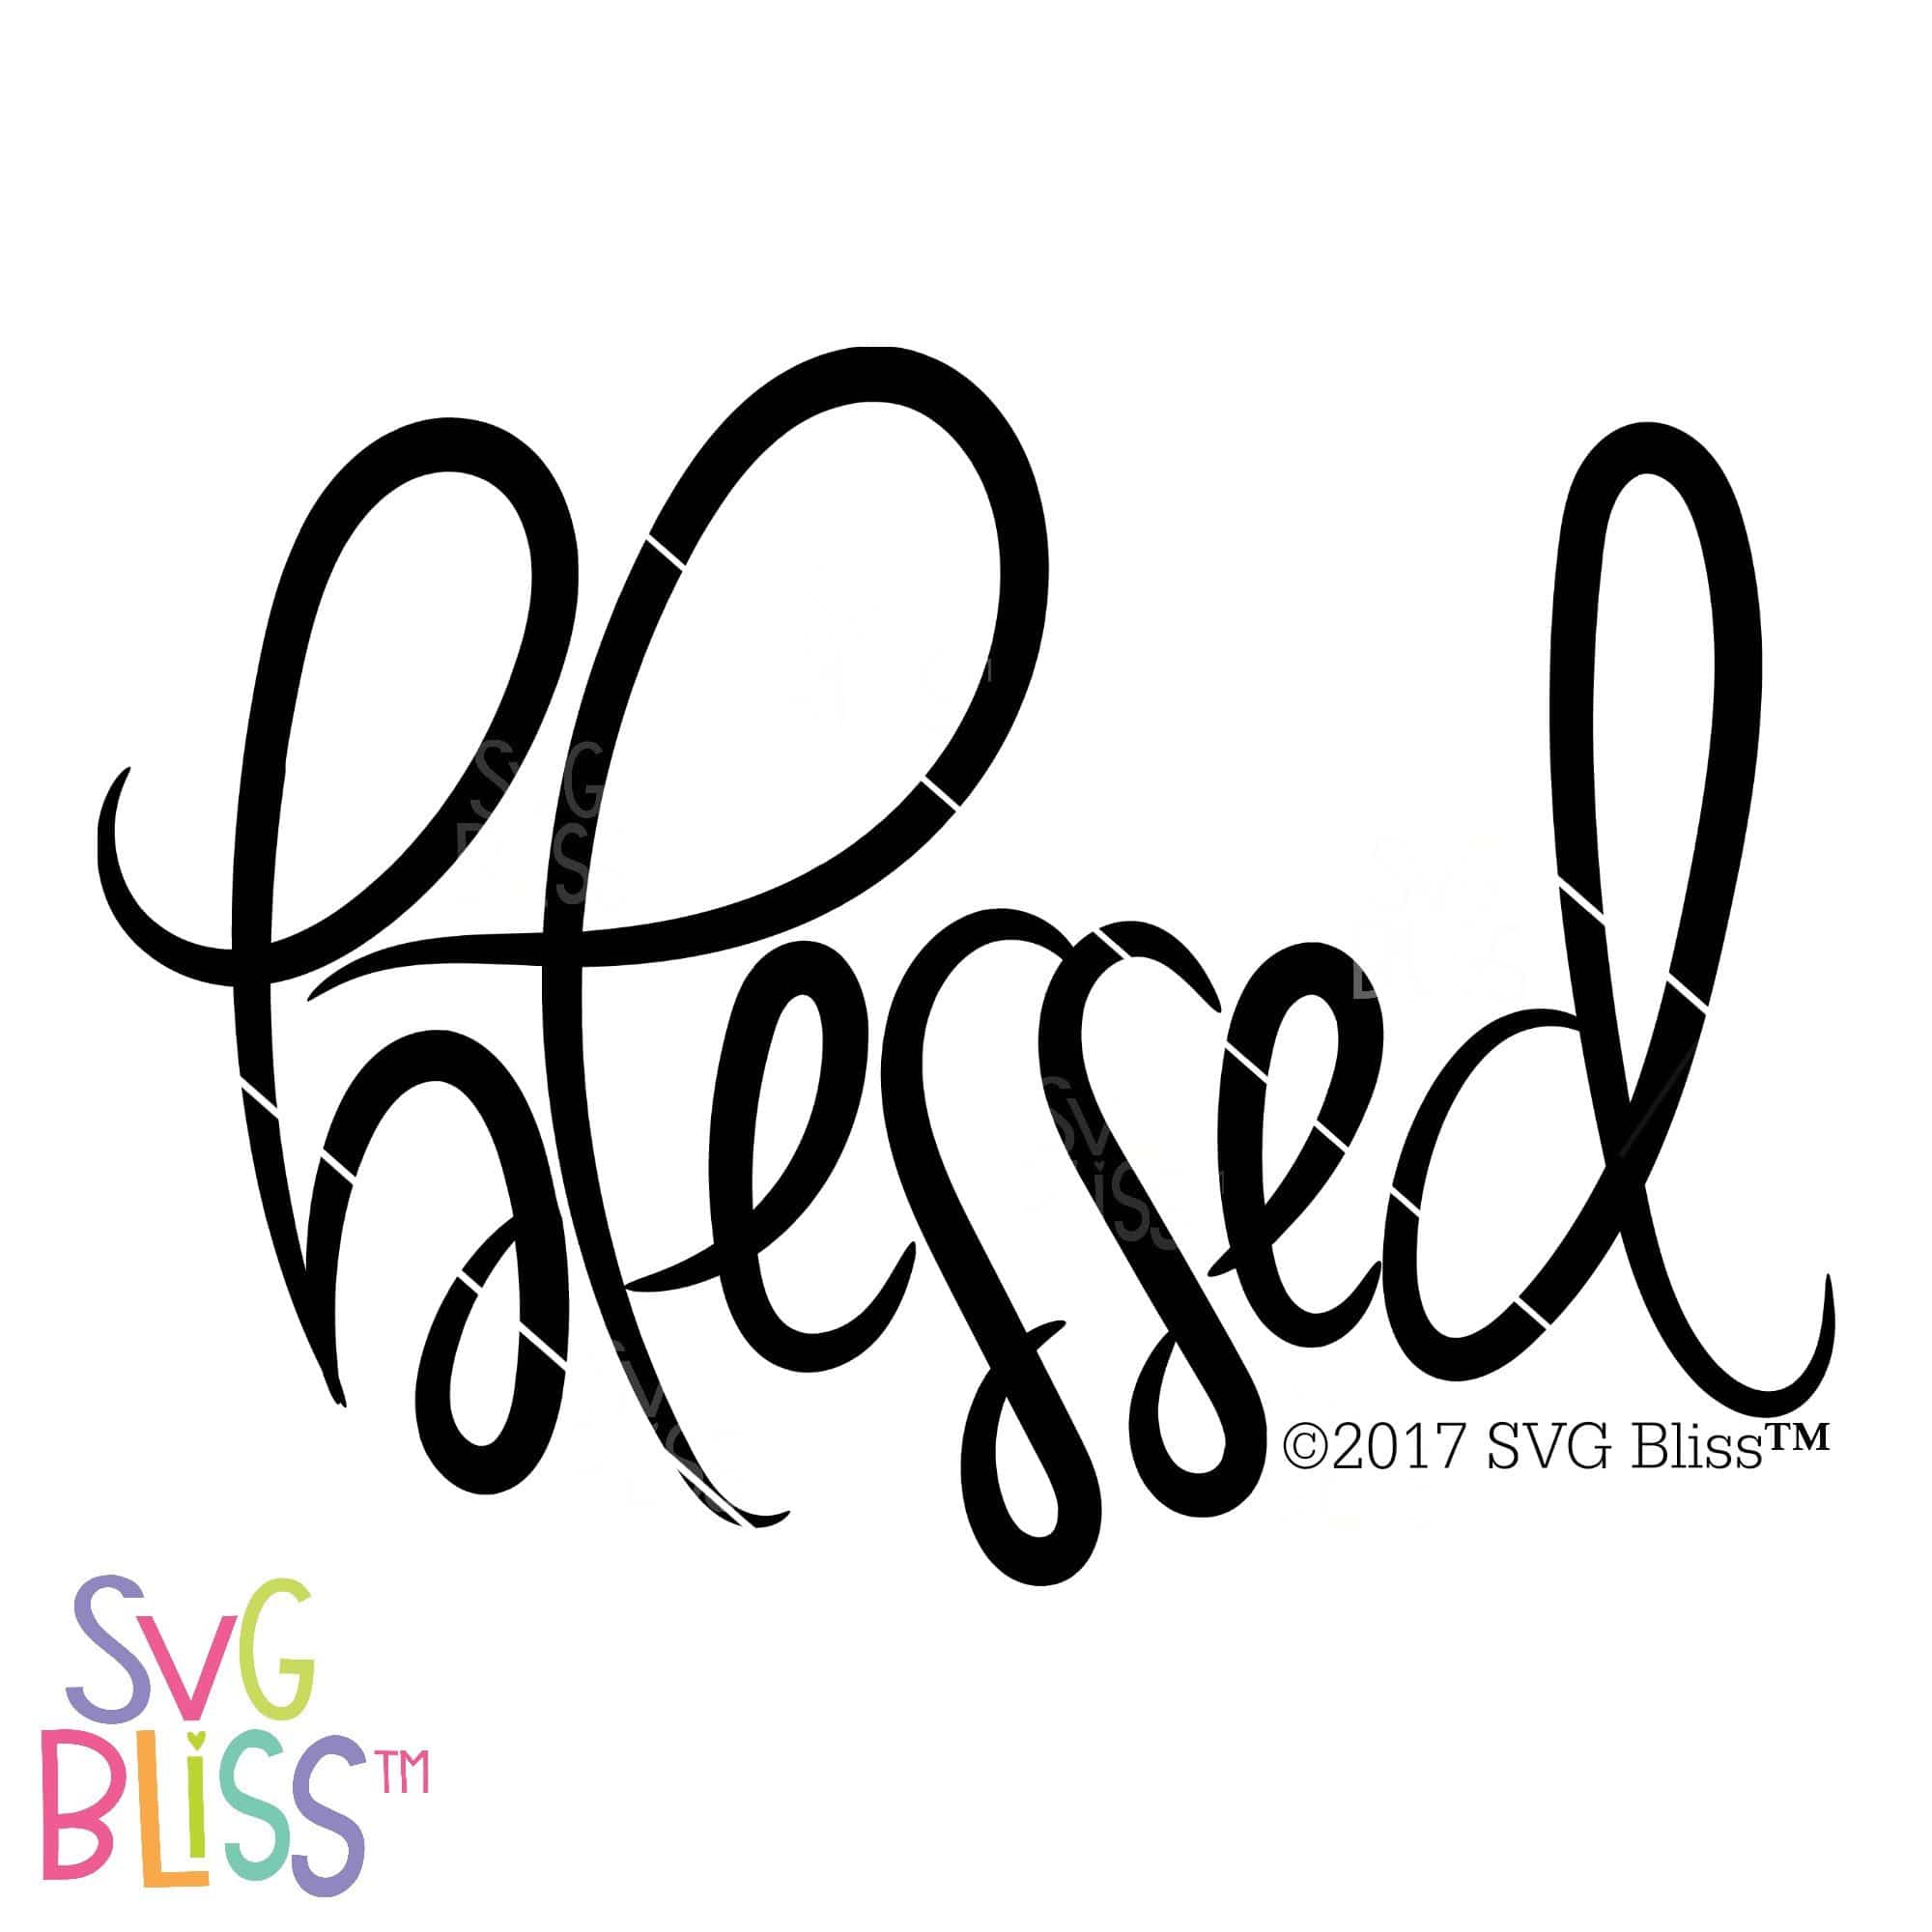 Blessed | SVG EPS DXF PNG – SVG Bliss